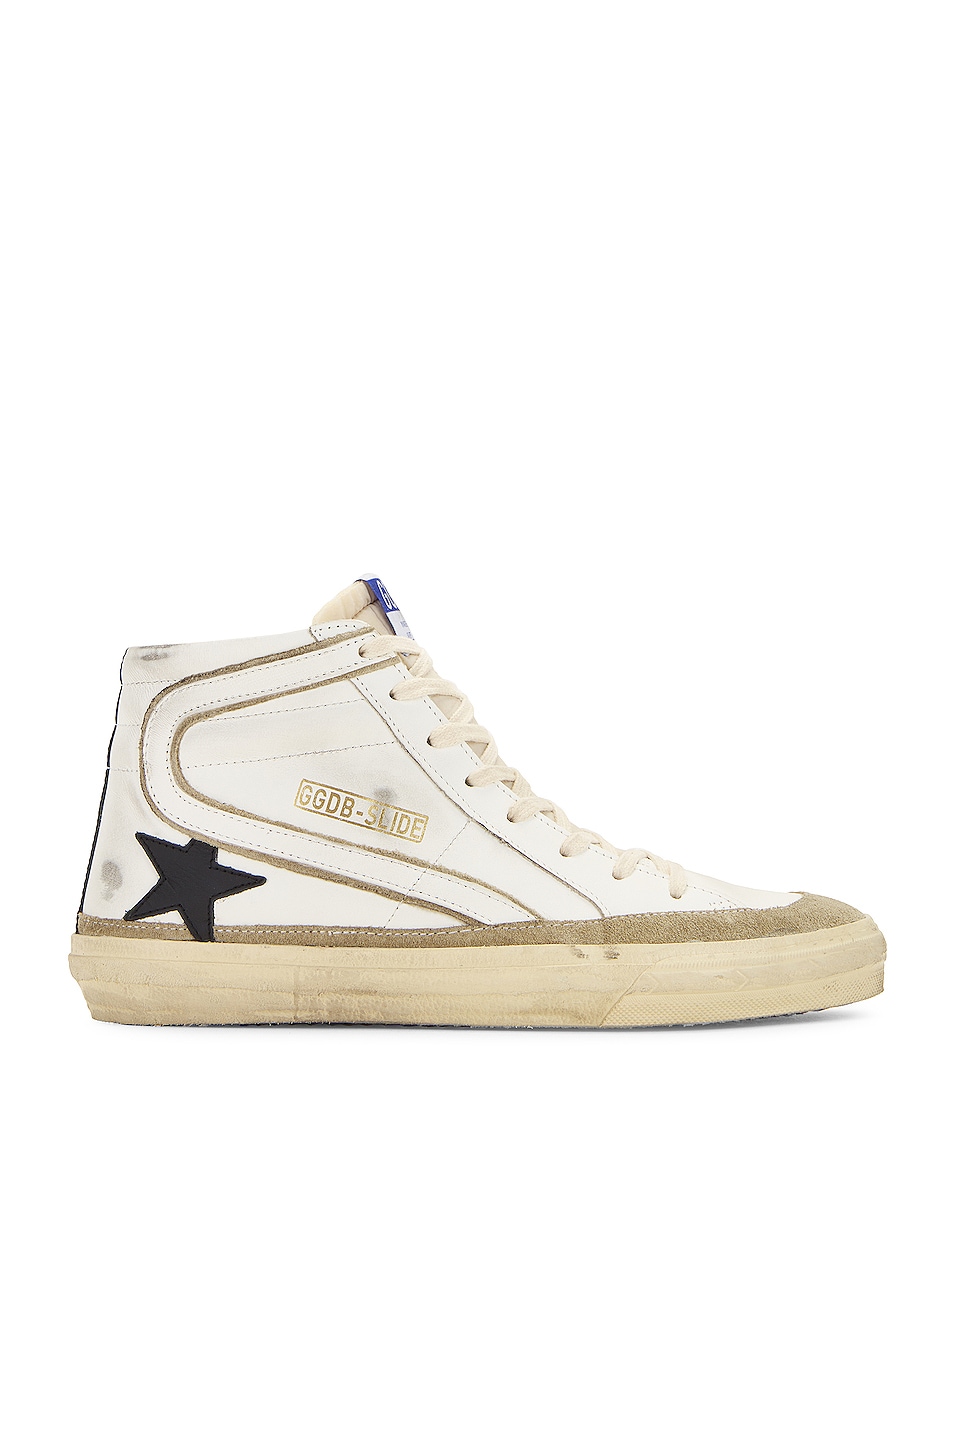 Image 1 of Golden Goose Star List Shoe in White, Yellow, Black, & Taupe